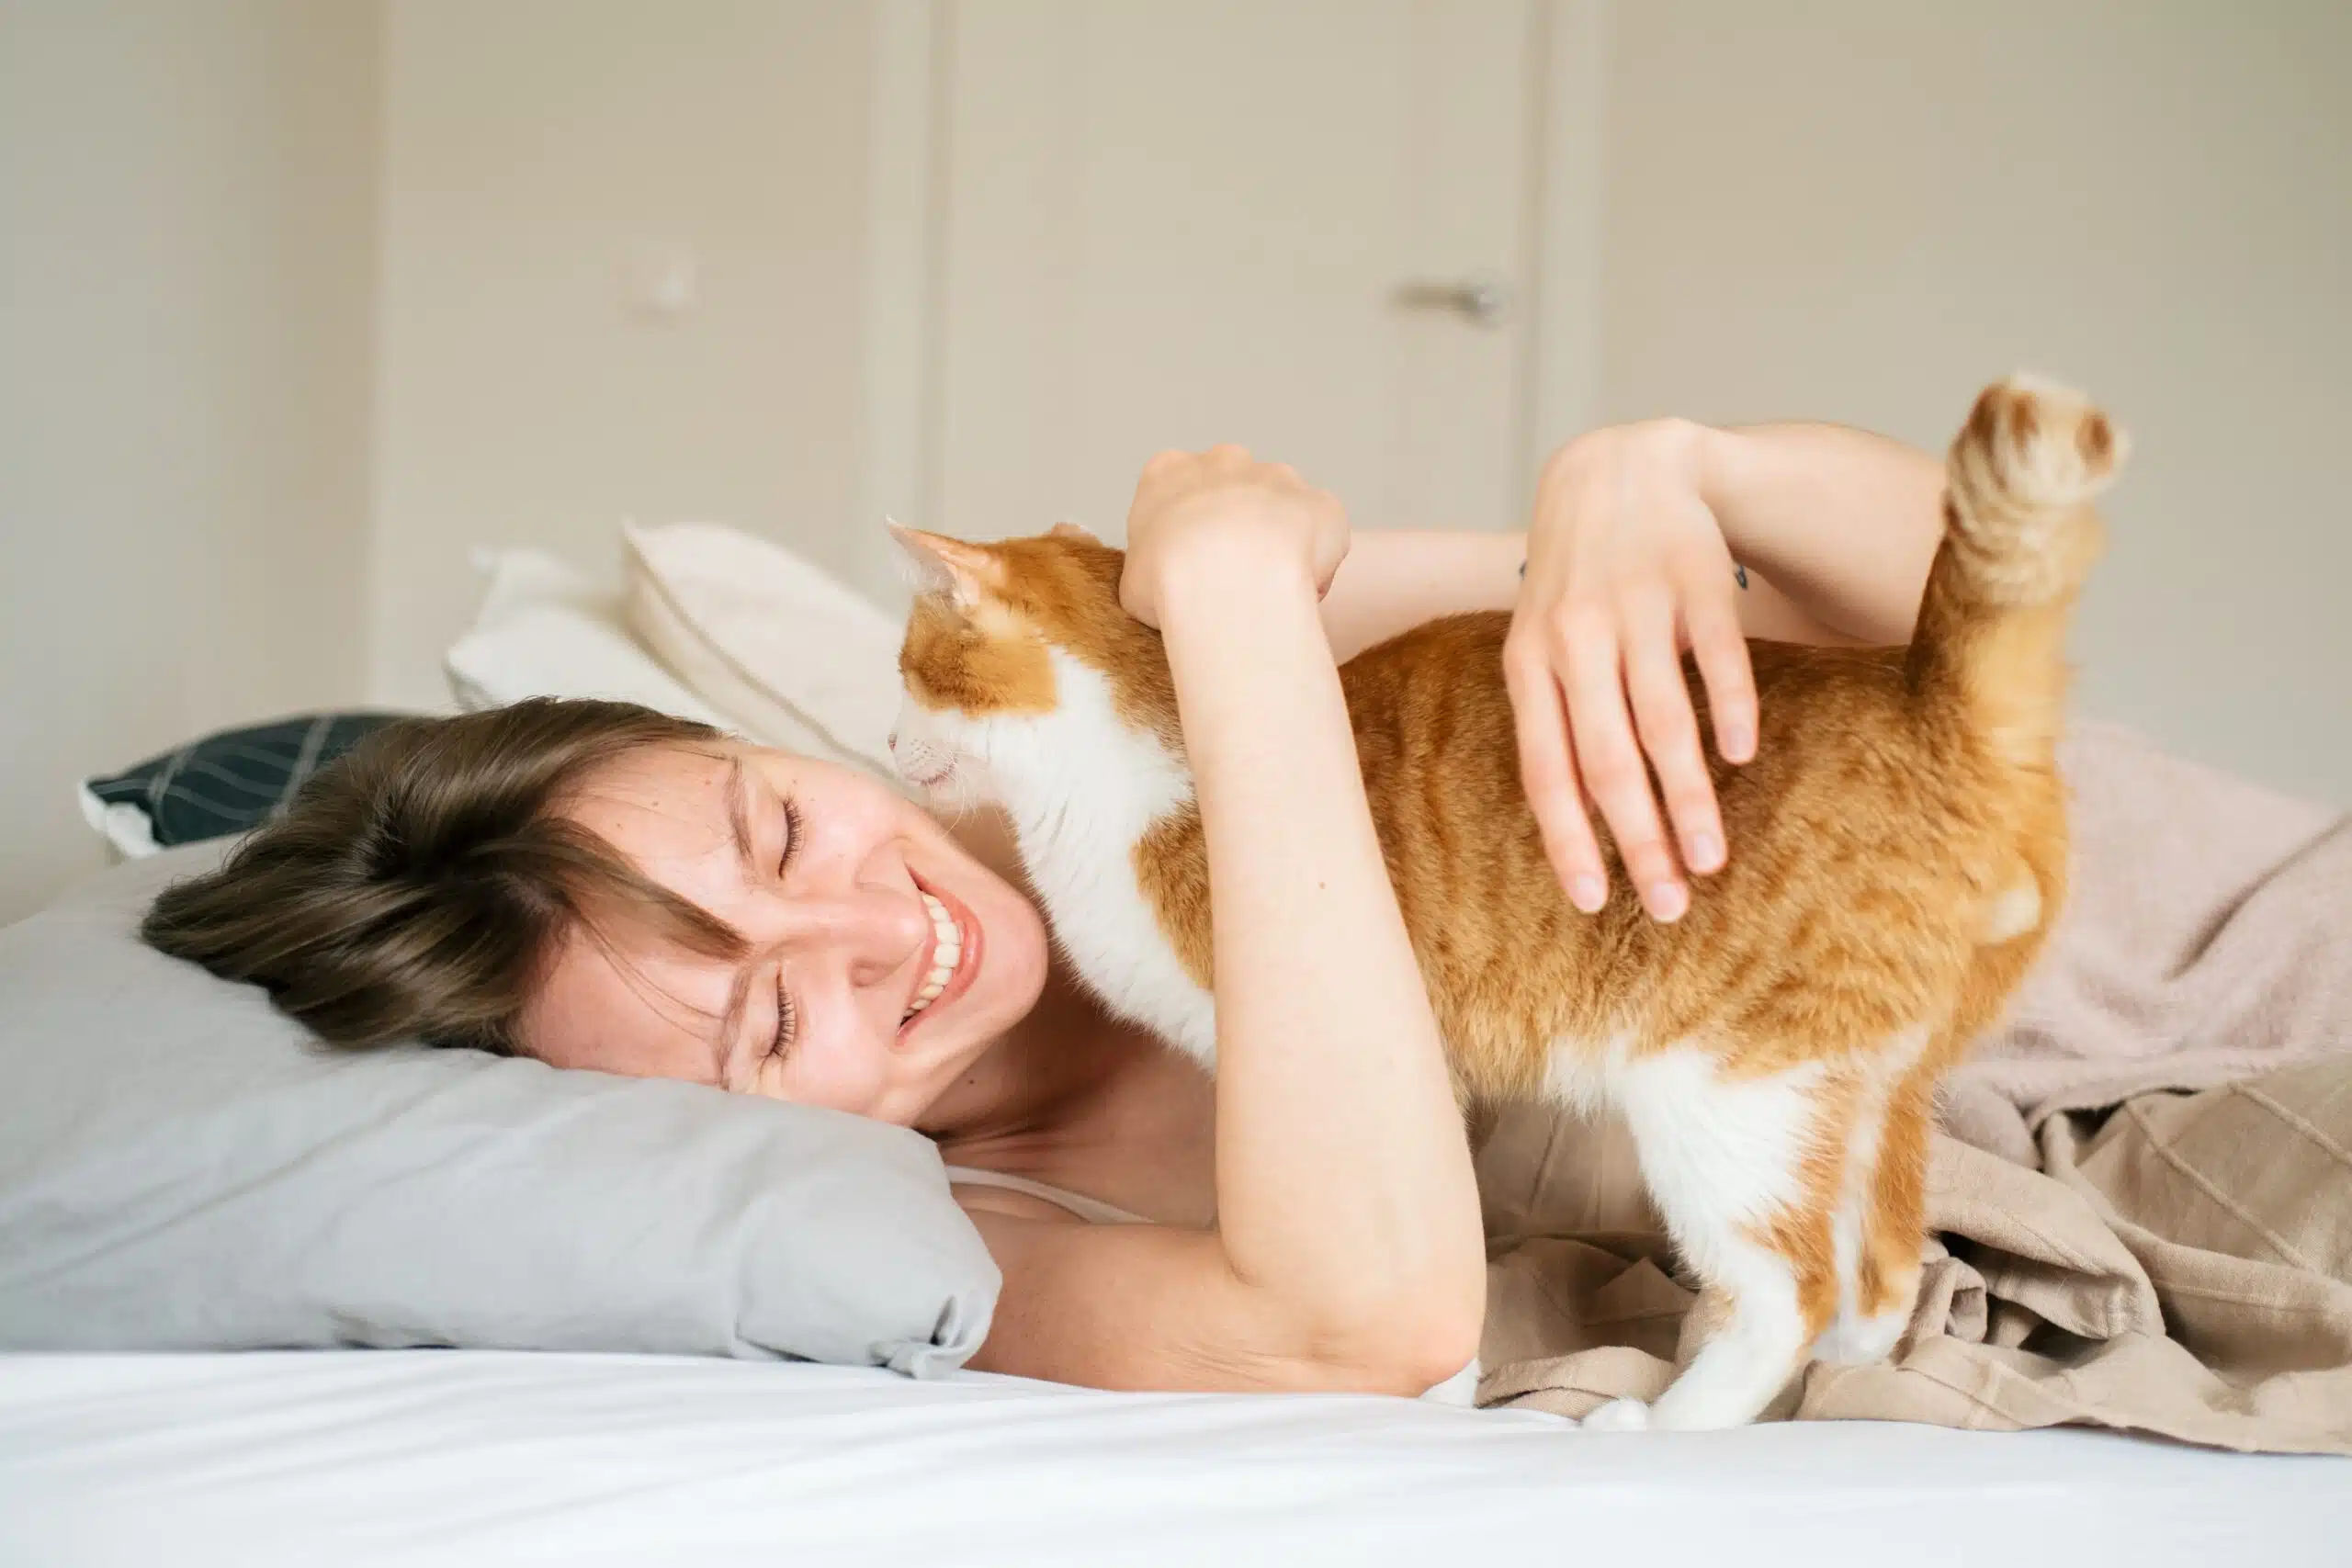 This lady wakes up to her pet after a good night's rest.